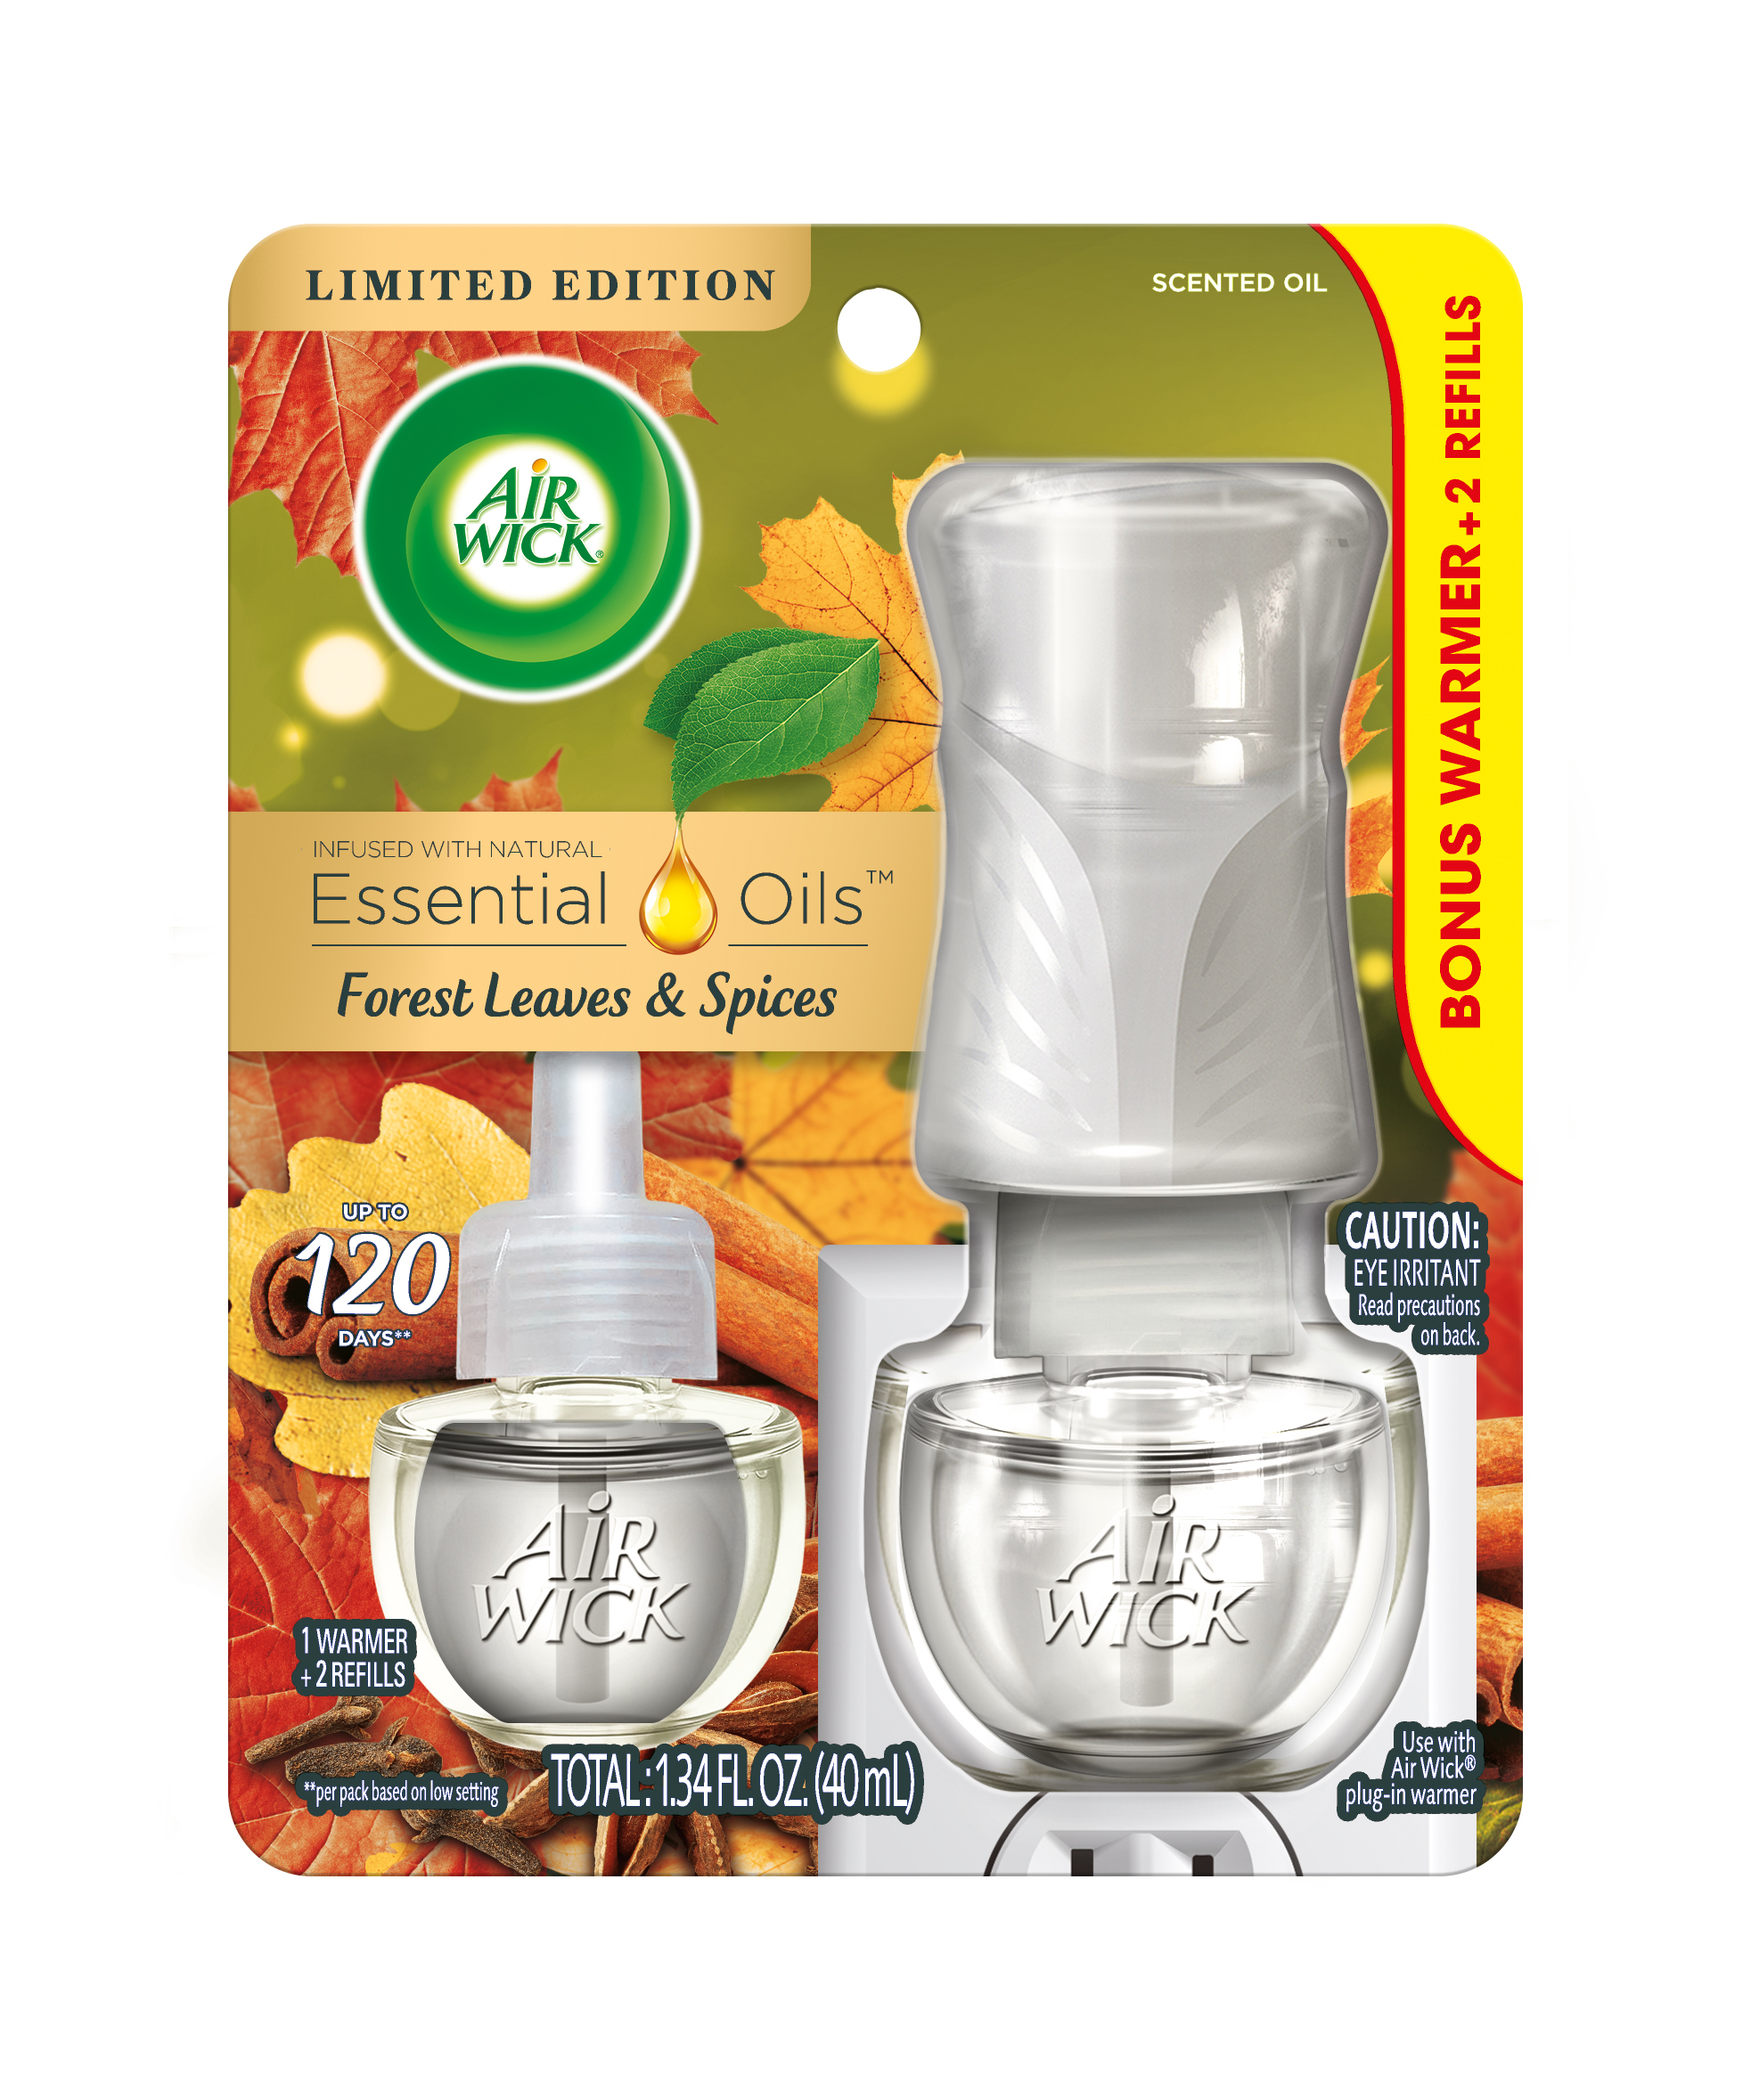 AIR WICK Scented Oil  Forest Leaves  Spices  Kit